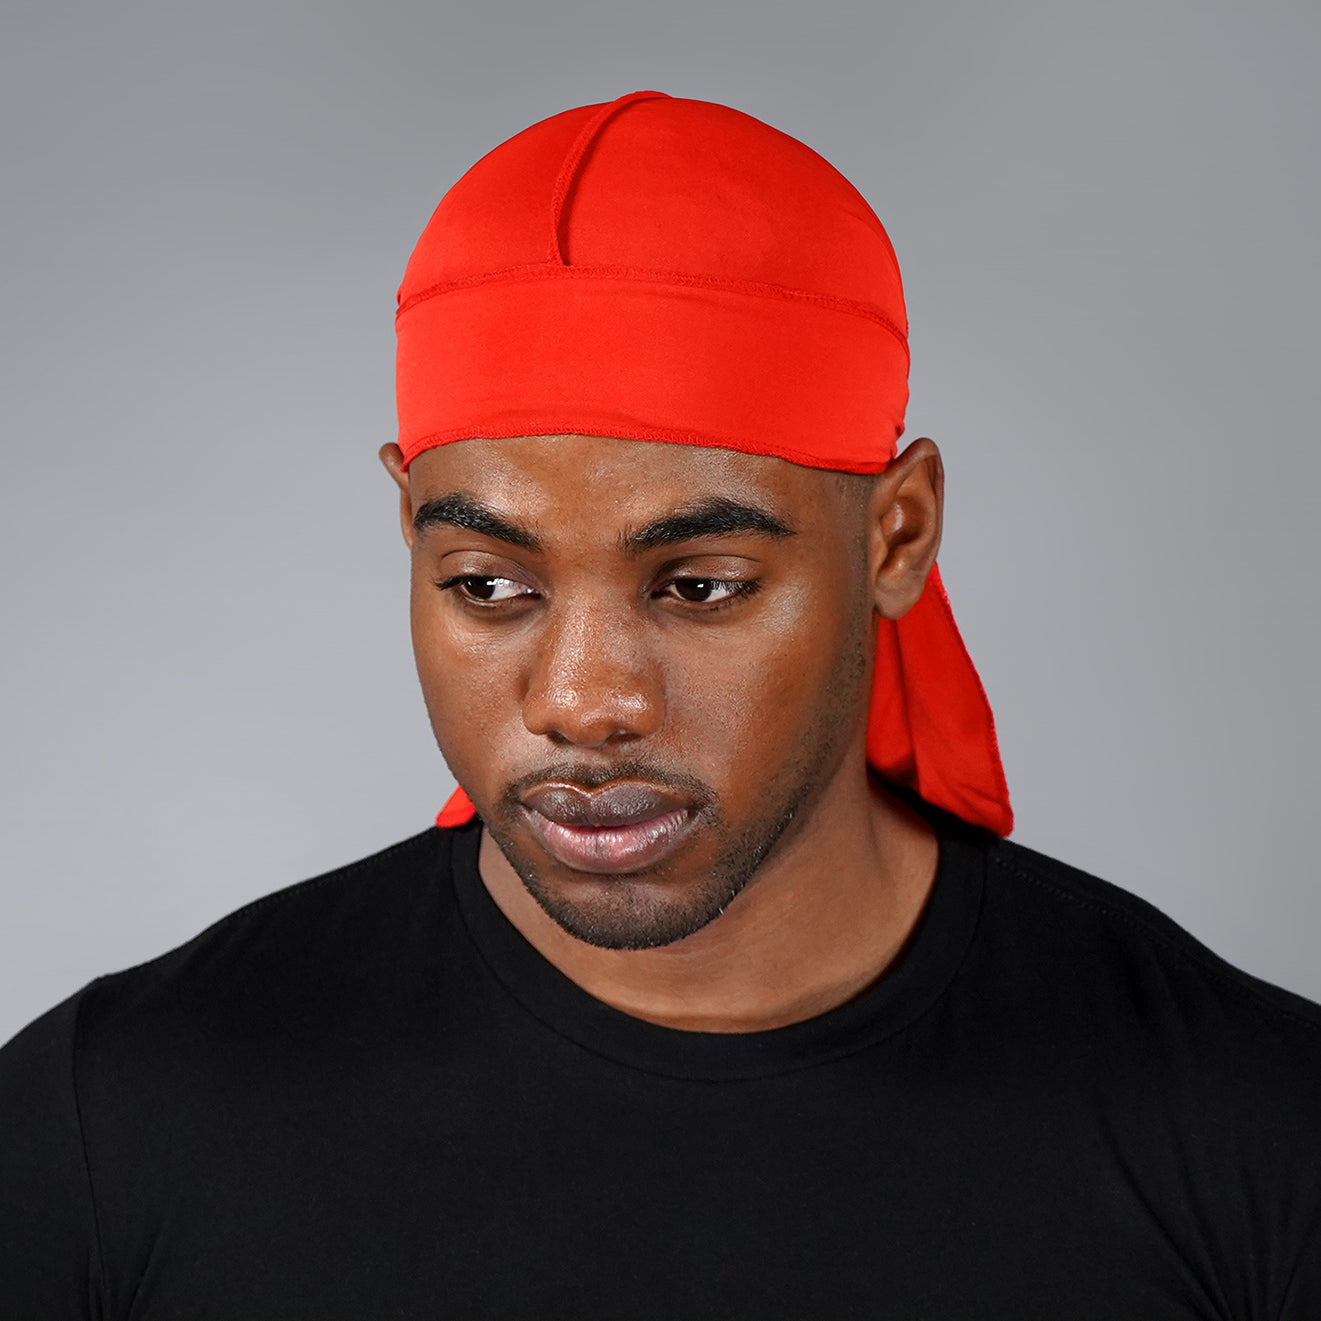 Hue Red Sports Durag